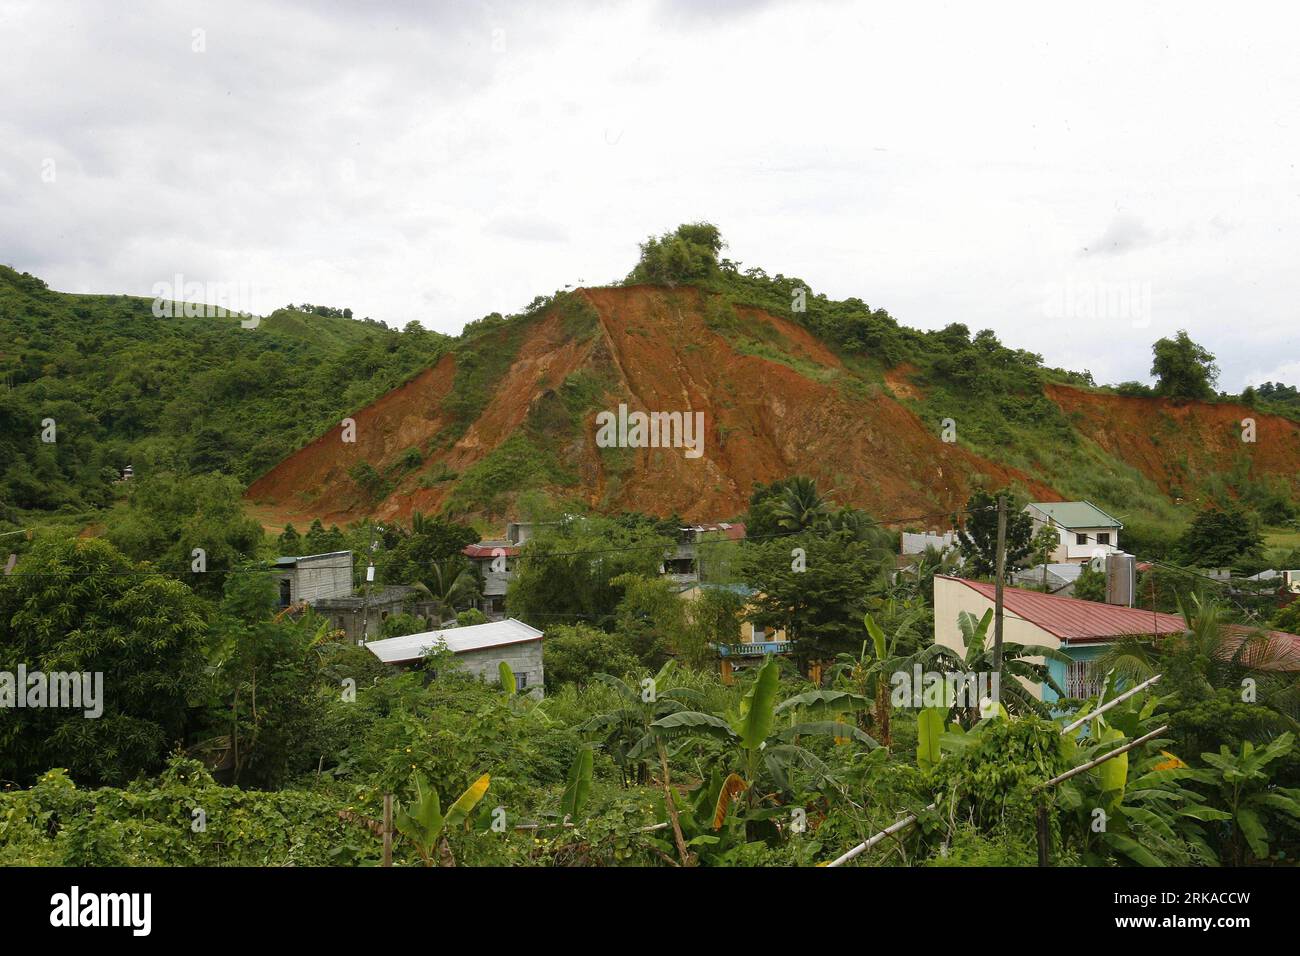 Bildnummer: 54311527  Datum: 18.08.2010  Copyright: imago/Xinhua (100818) -- MANILA, Aug. 18, 2010 (Xinhua) -- Houses are seen at the foot of an excavated hill in San Mateo, Rizal, Philippines, Aug. 18, 2010. The Philippine Atmospheric, Geophysic and Astronomical Services Administration warned the public about possible landslides due to a shallow low pressure area 60 kilometers northwest of Catarman, northern Samar. Some areas in the country that are prone to floods and landslides are inhabited by residents, according to the National Geohazard Mapping and Assessment Program done by the Mines a Stock Photo